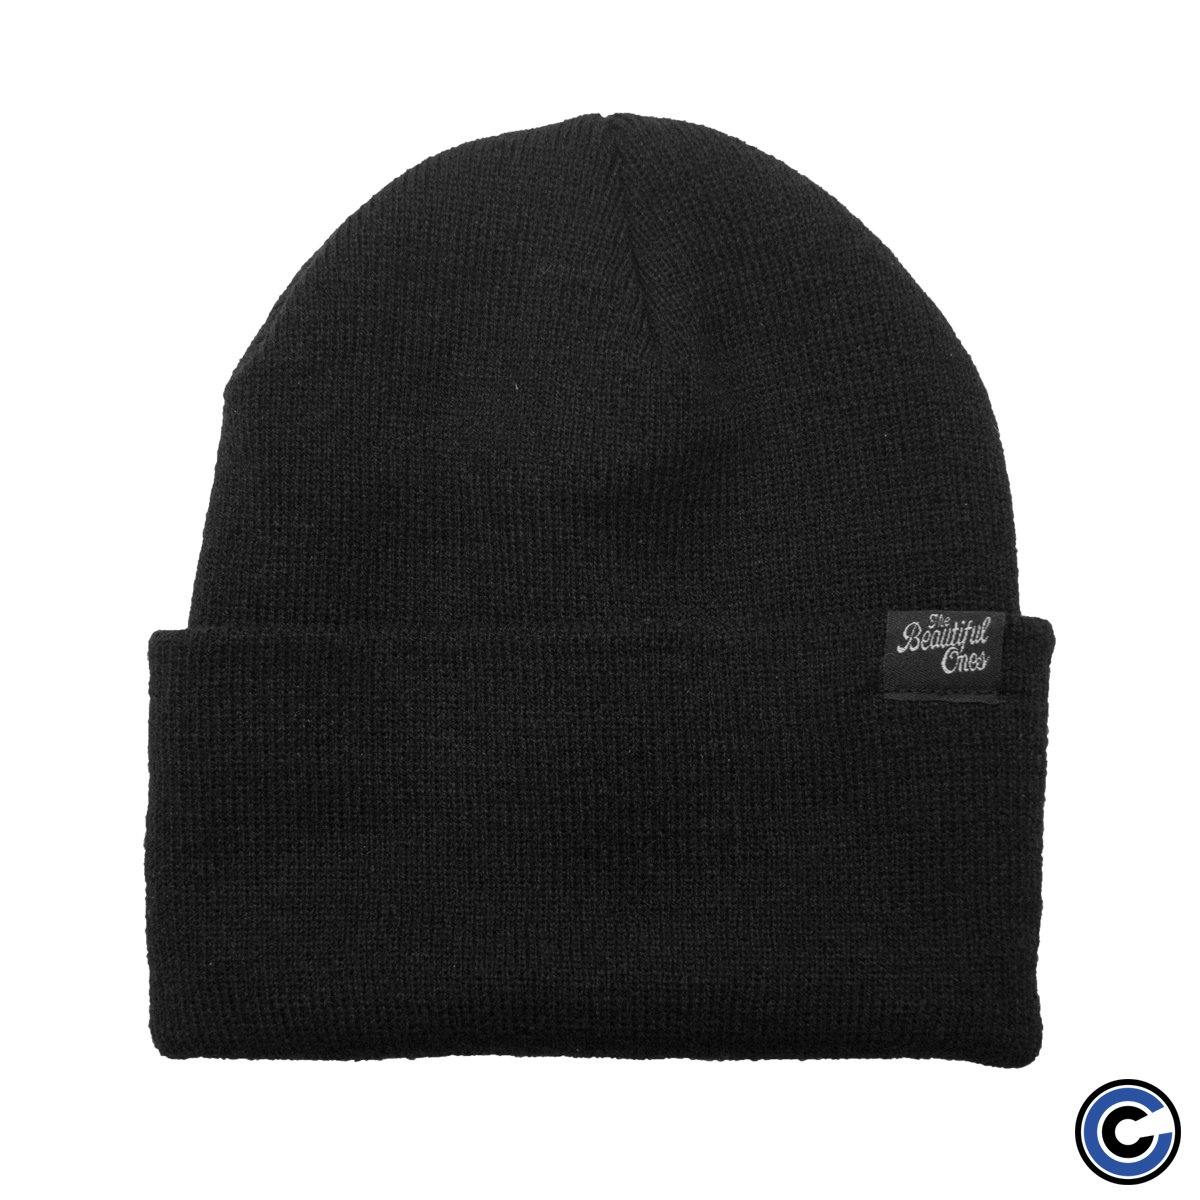 Buy – The Beautiful Ones "Script Patch" Beanie – Band & Music Merch – Cold Cuts Merch